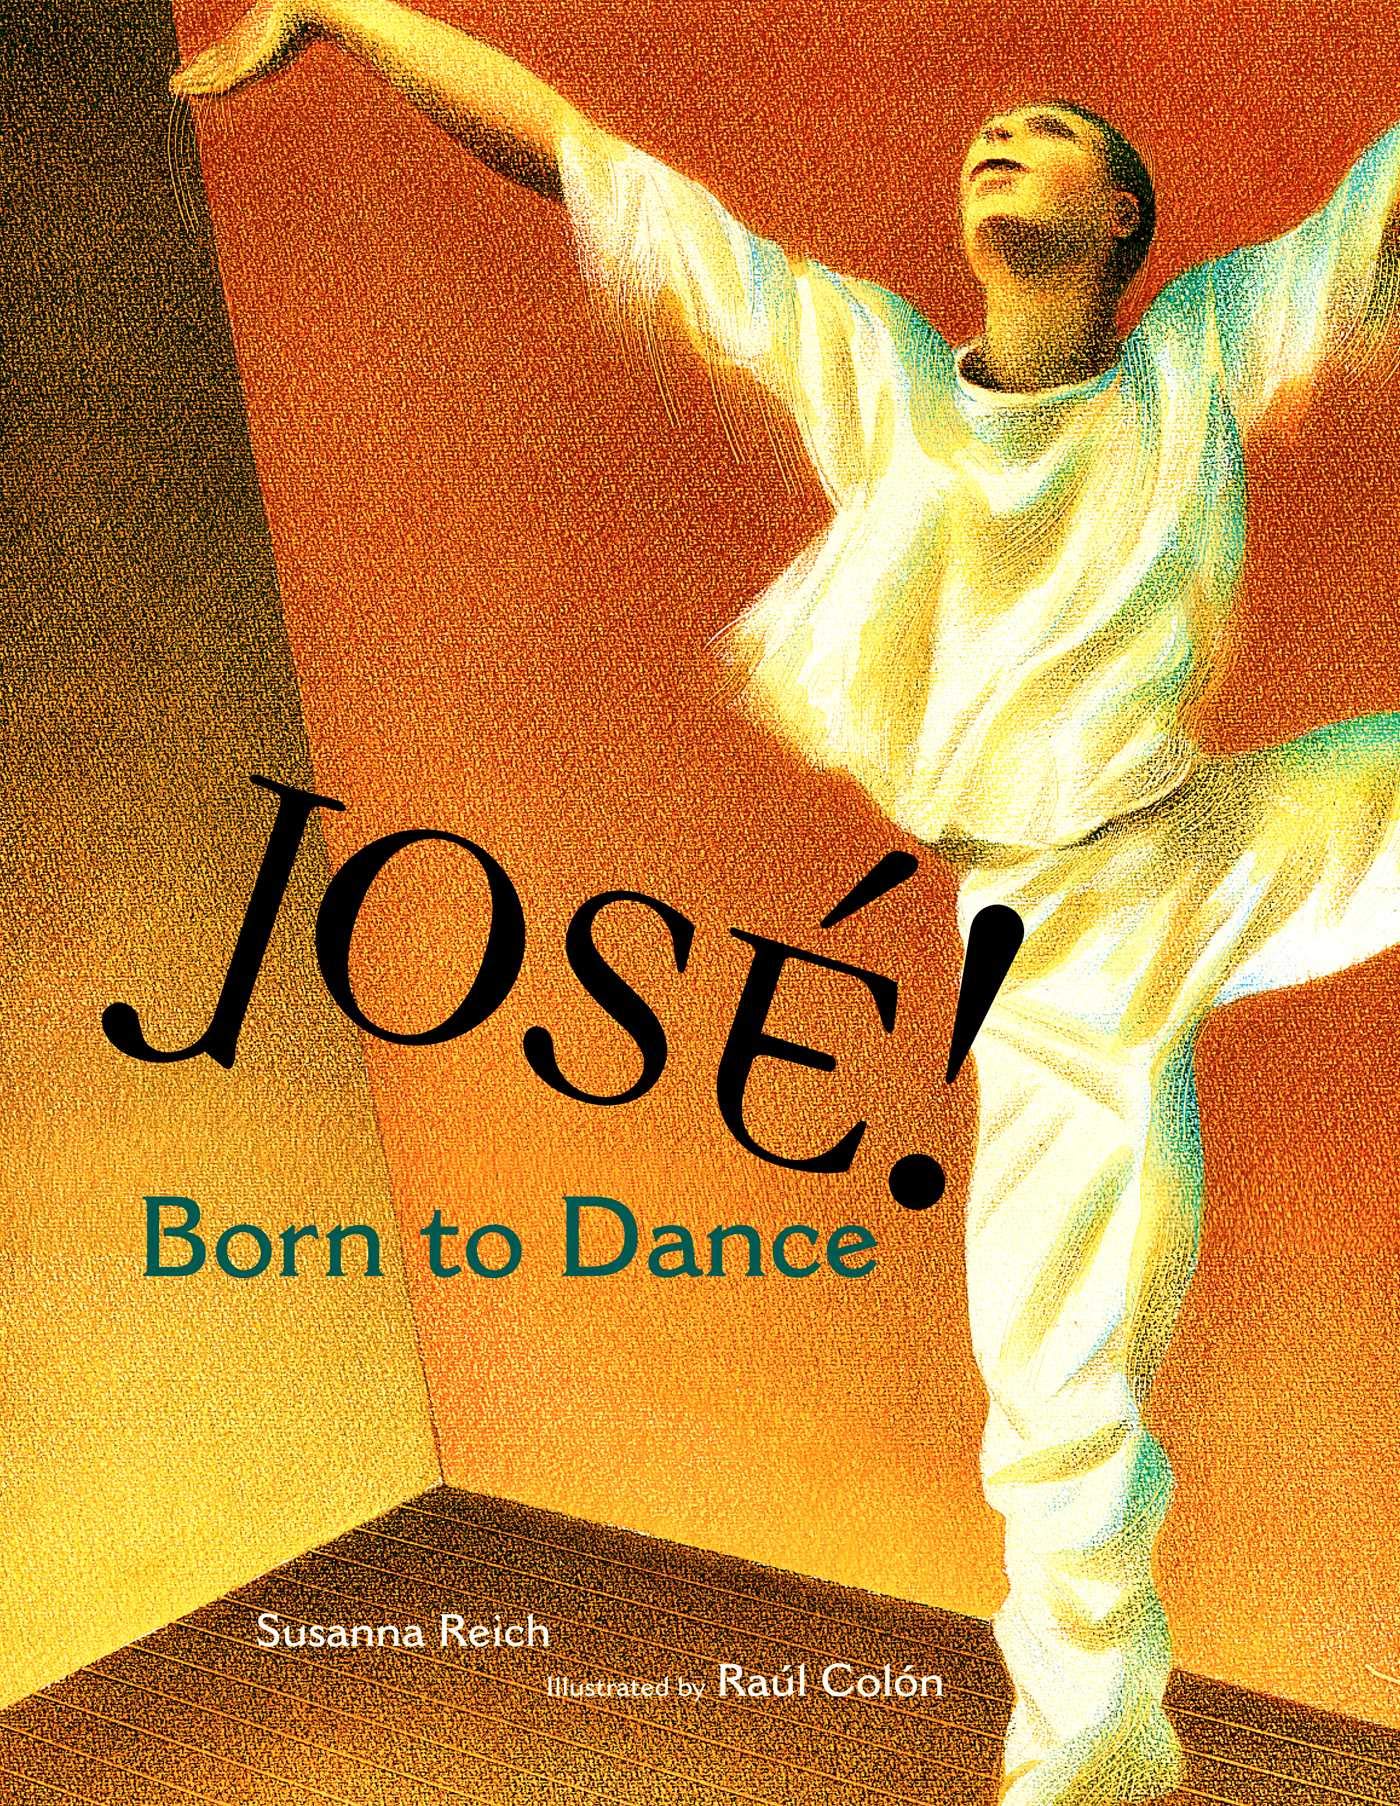 Book cover of Jose! Born to Dance, written by Susanna Reich